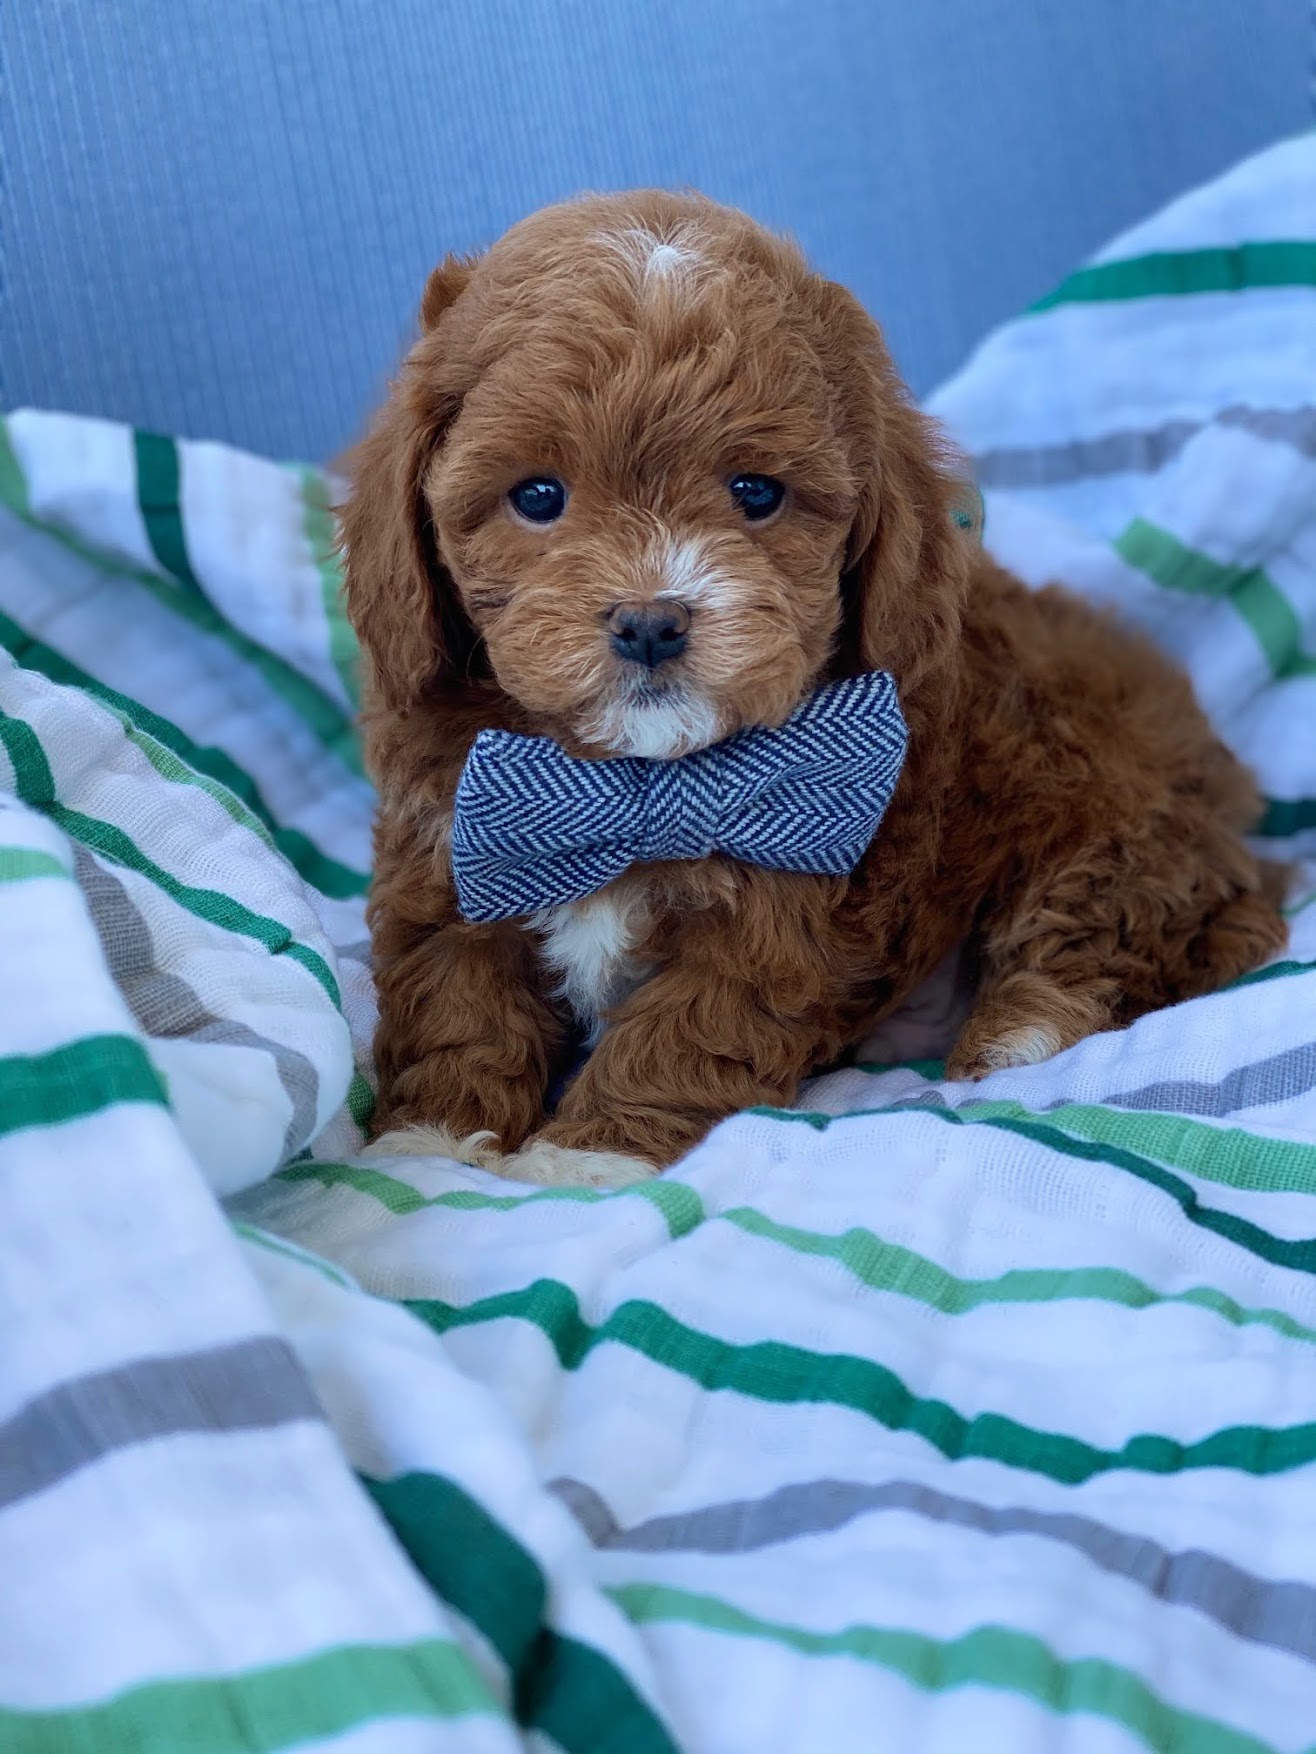 A charming brown puppy wearing a dapper bow tie on its head, looking adorable and playful.